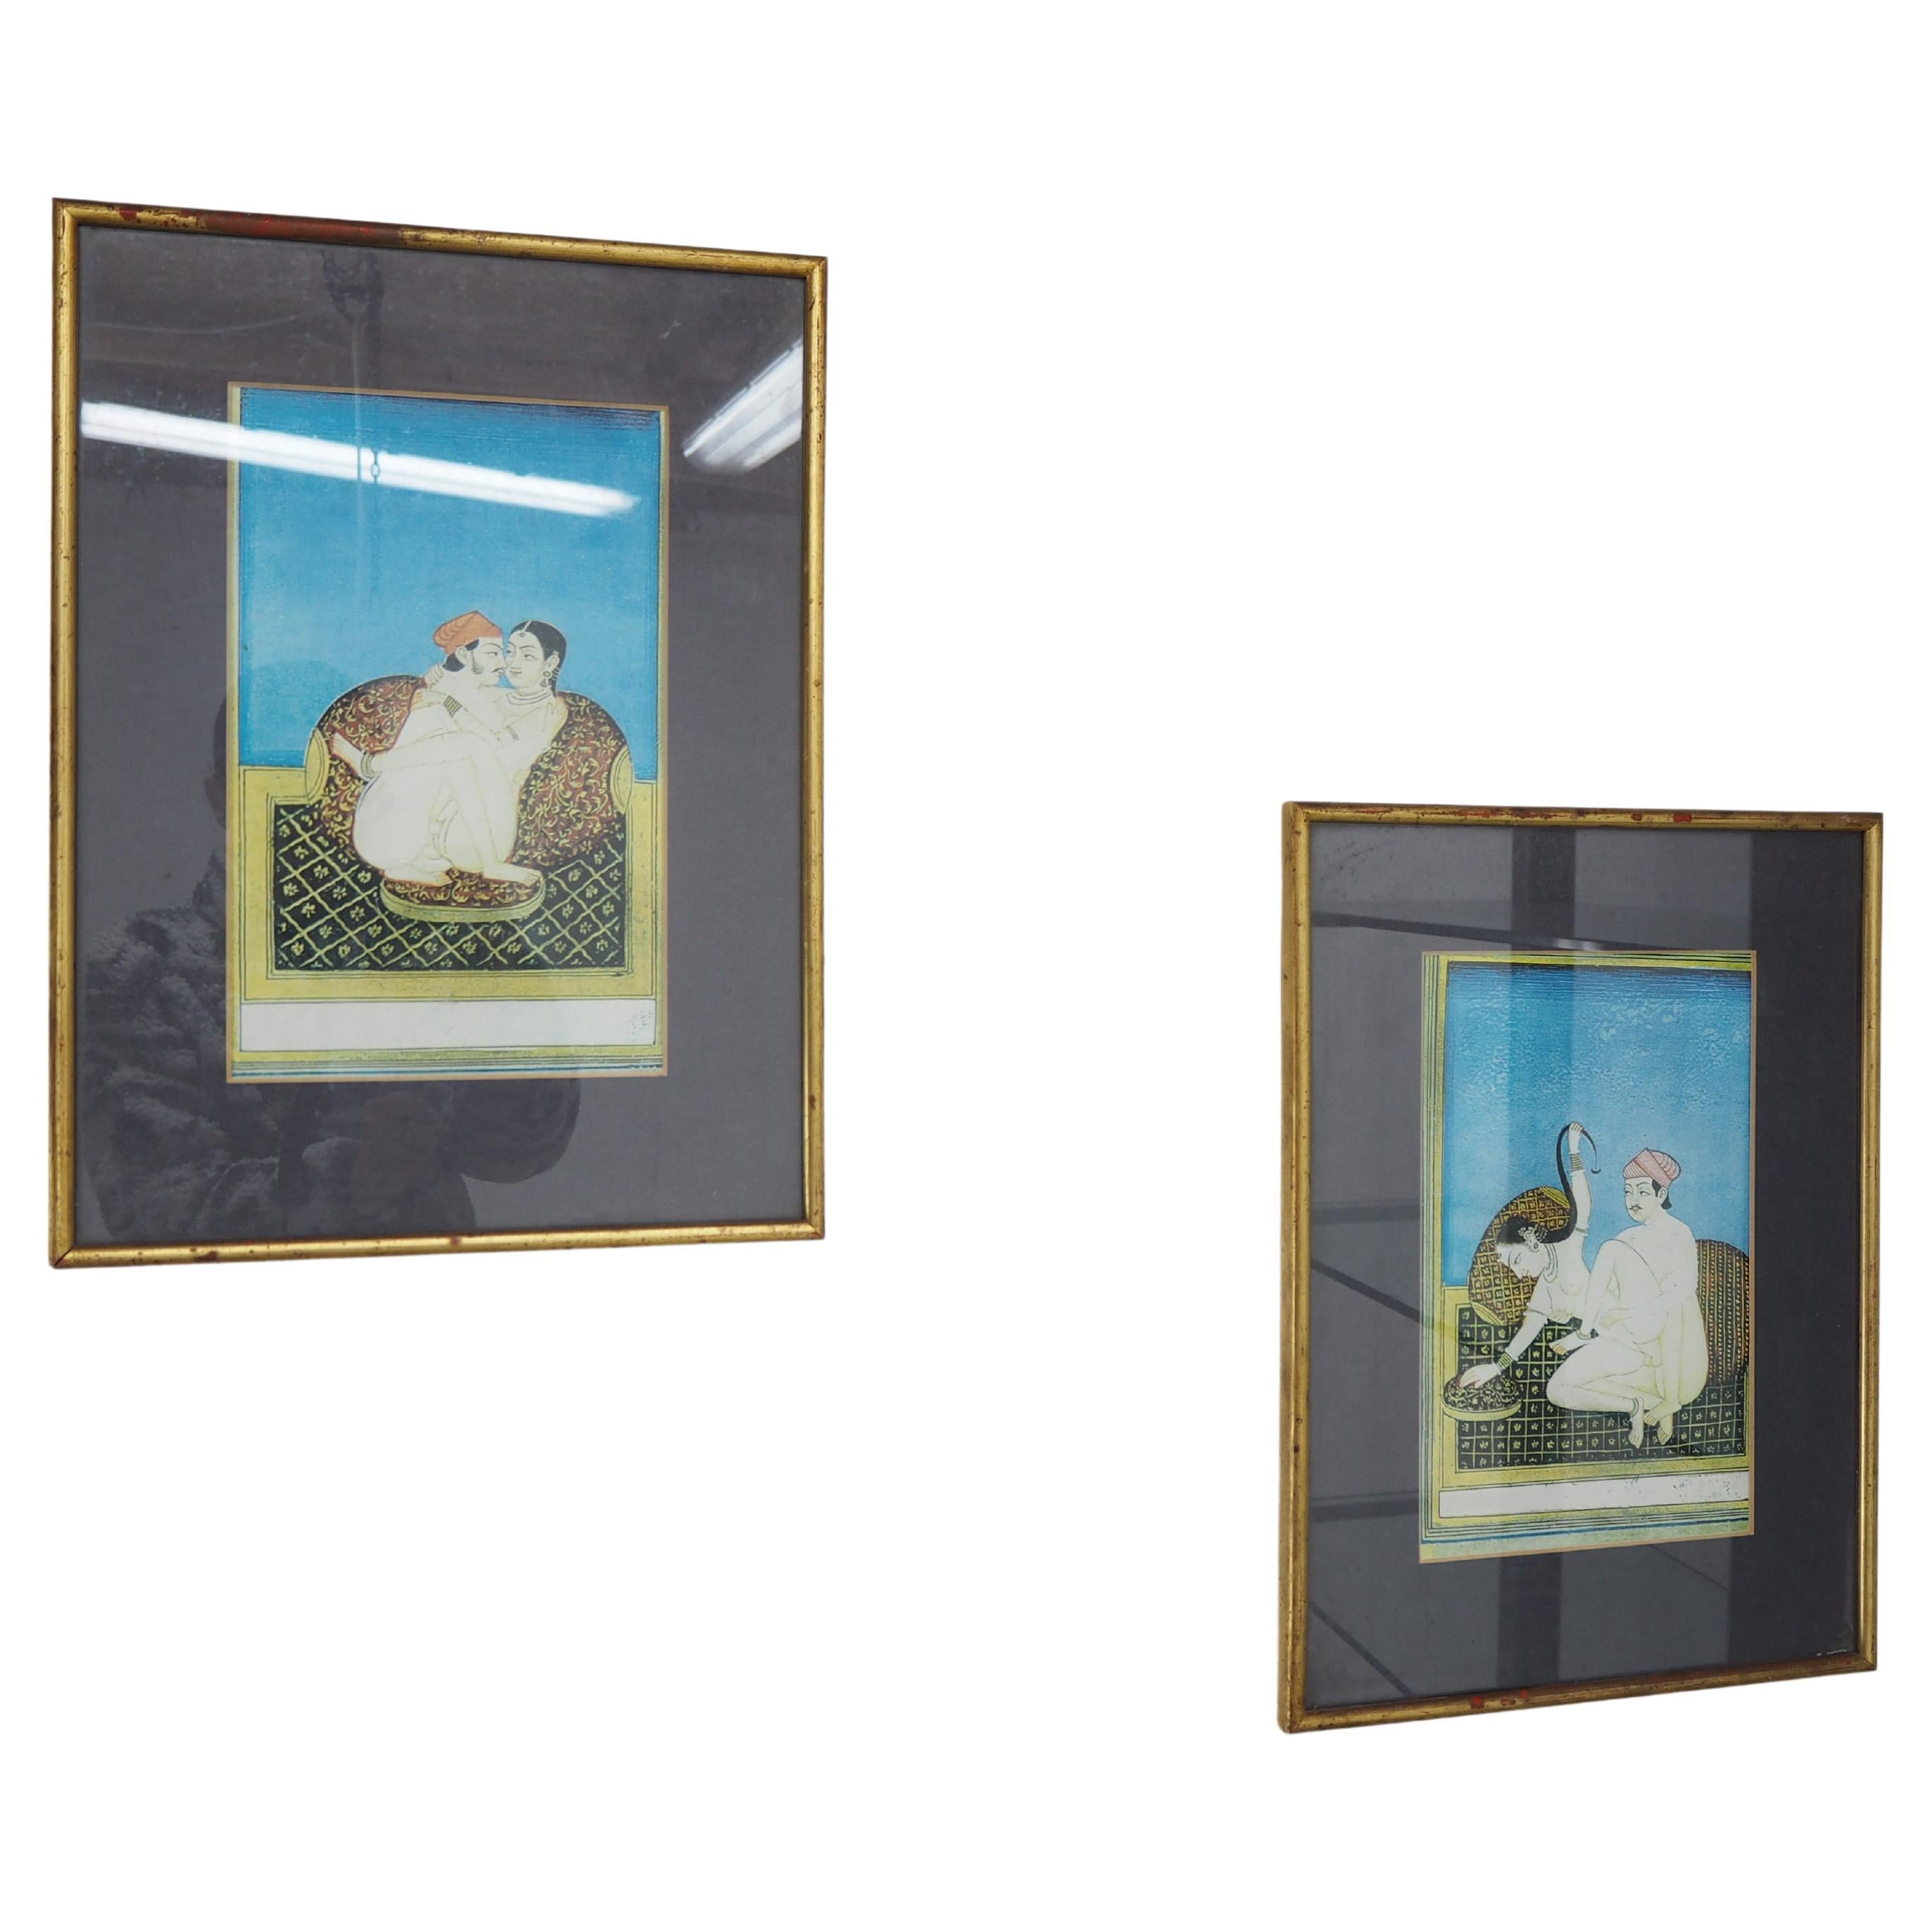 Vintage Japanese Kamasutra Pictures in Wood Frame, 1980s